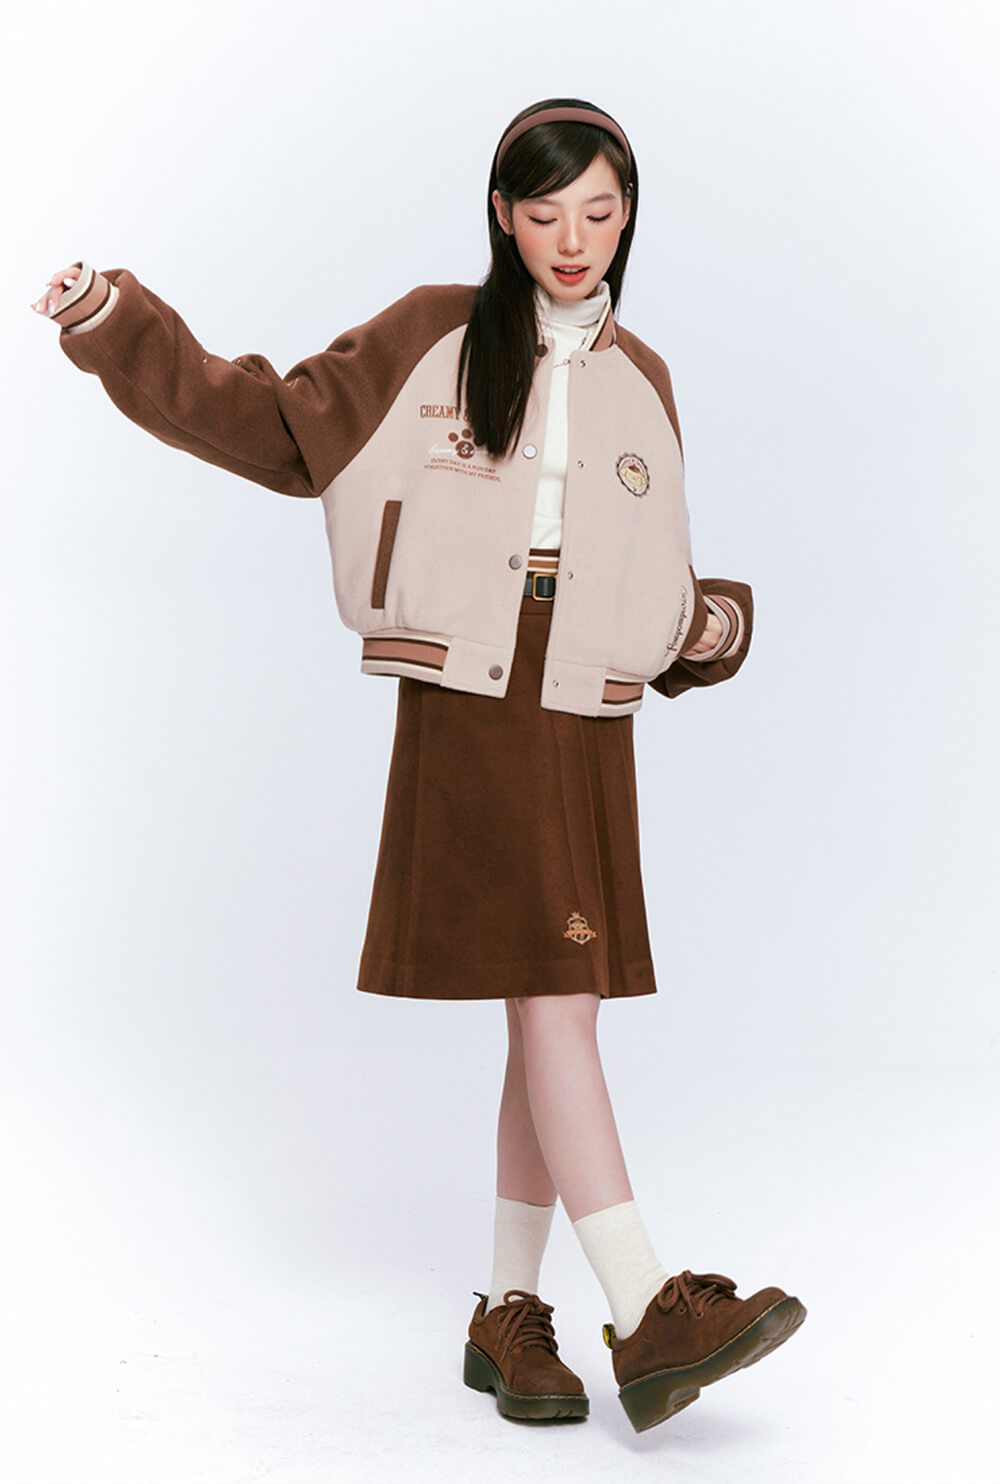 japanese-fashion-girl-pompompurin-brown-varsity-jacket-and-pleated-skirt